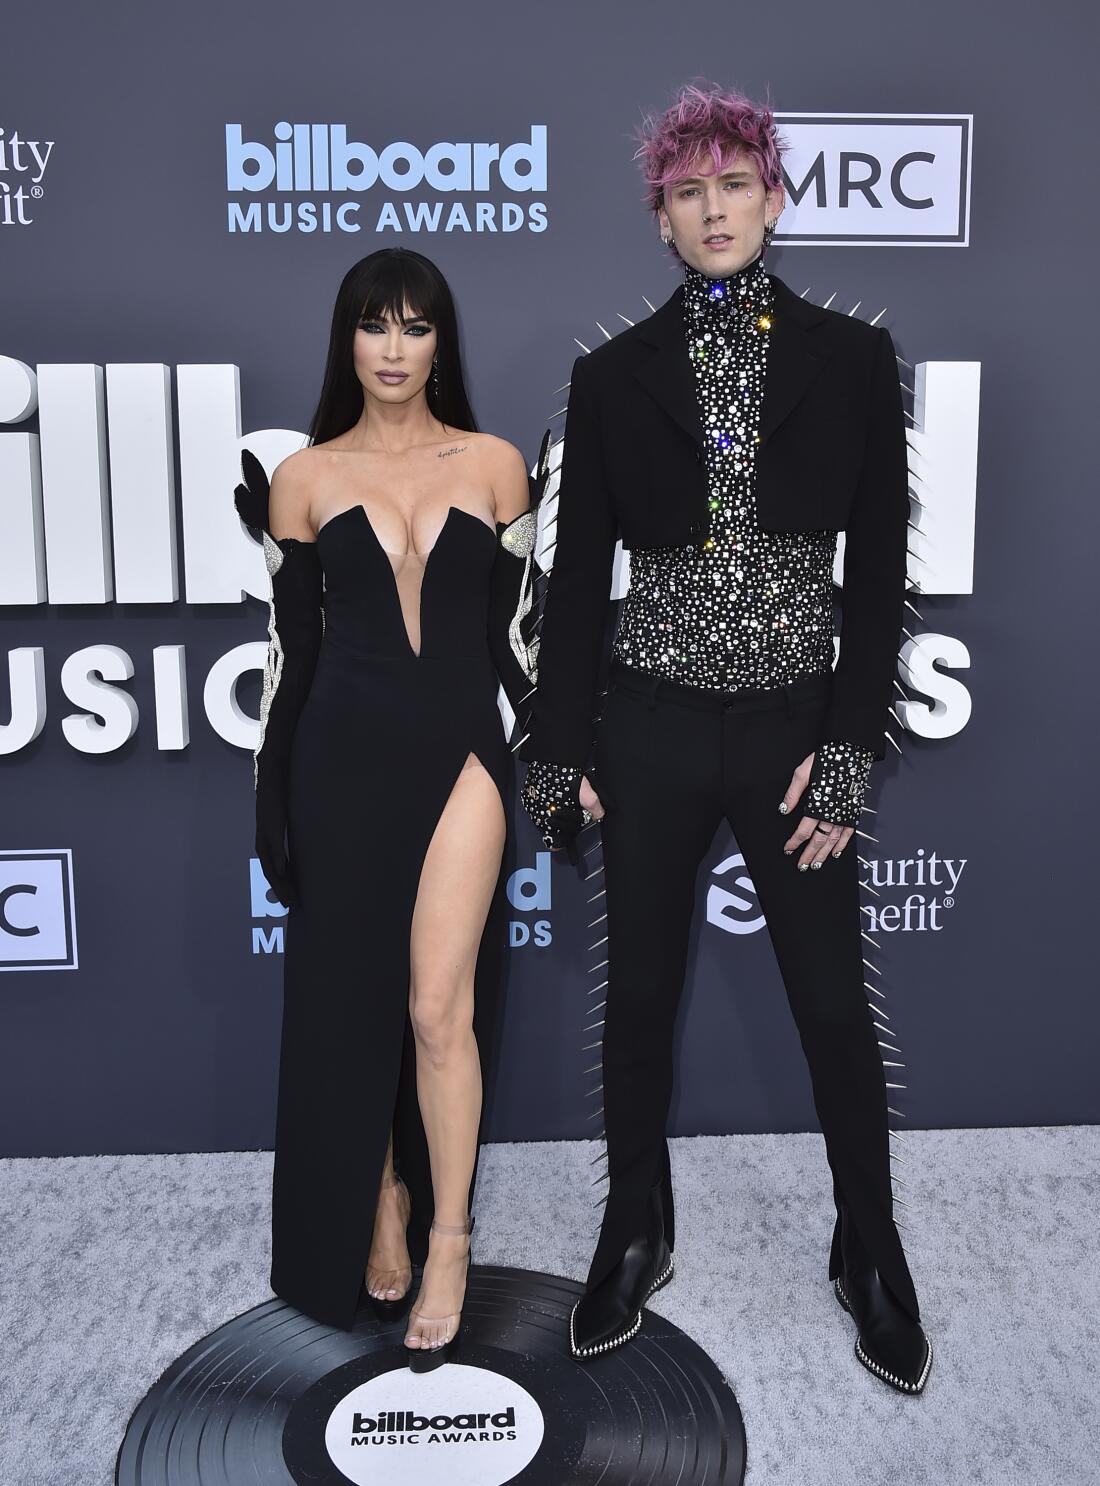 Machine Gun Kelly looks like quite the cool dad in punky attire